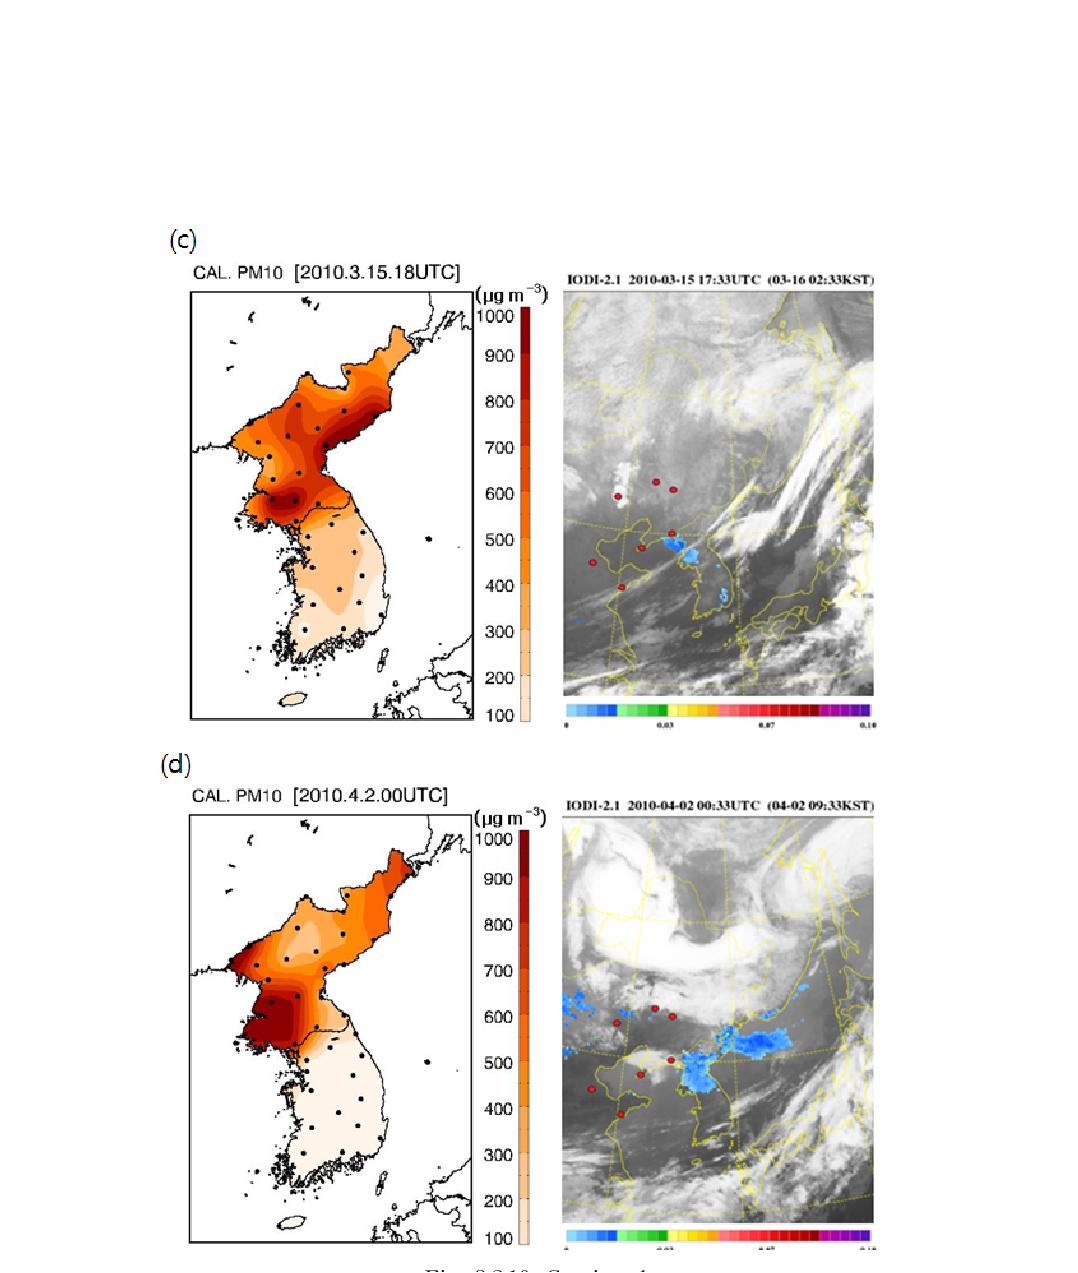 Spatial distributions of calculated PM10 concentration using visibility data (left) and IODI images of MTSAT (left) at (a) 21 UTC 24 January (b) 15 UTC 12 March, (c) 18 UTC 15 March, (d) 00 UTC 2 April, (e) 18 UTC 2 December, and (f) 09 UTC 10 December in 2010.